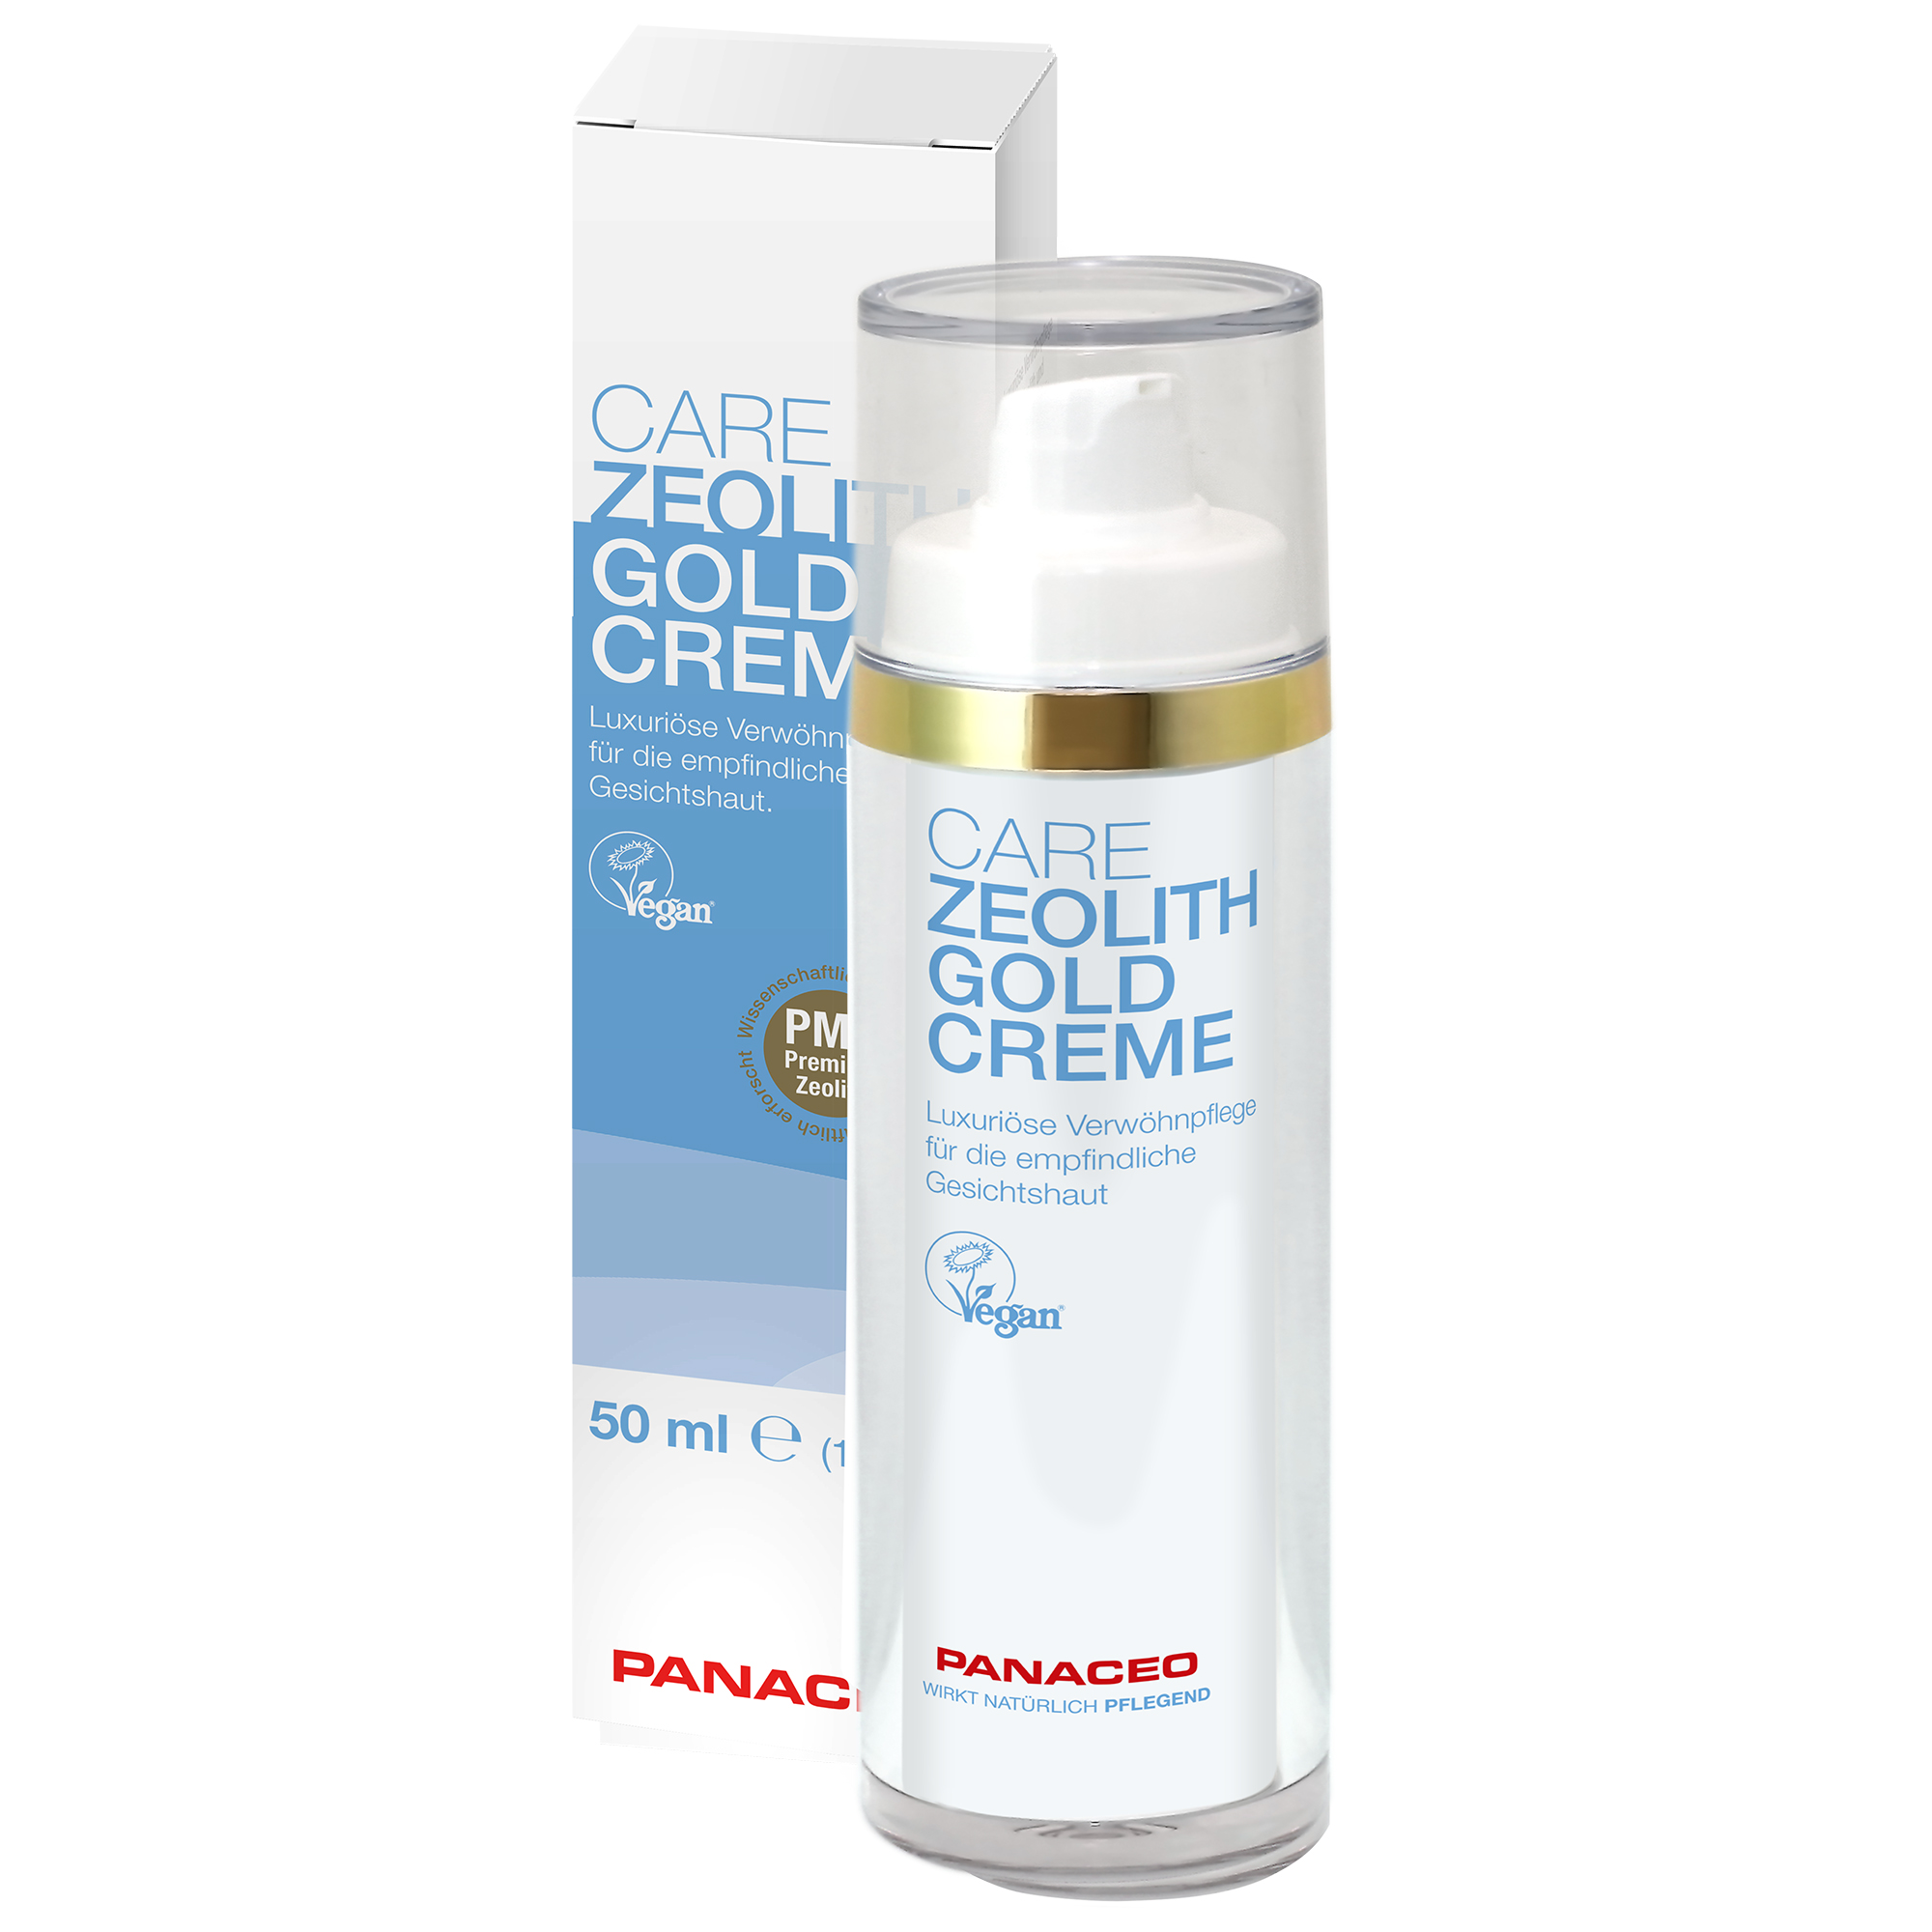 PANACEO CARE Zeolith-Goldcreme